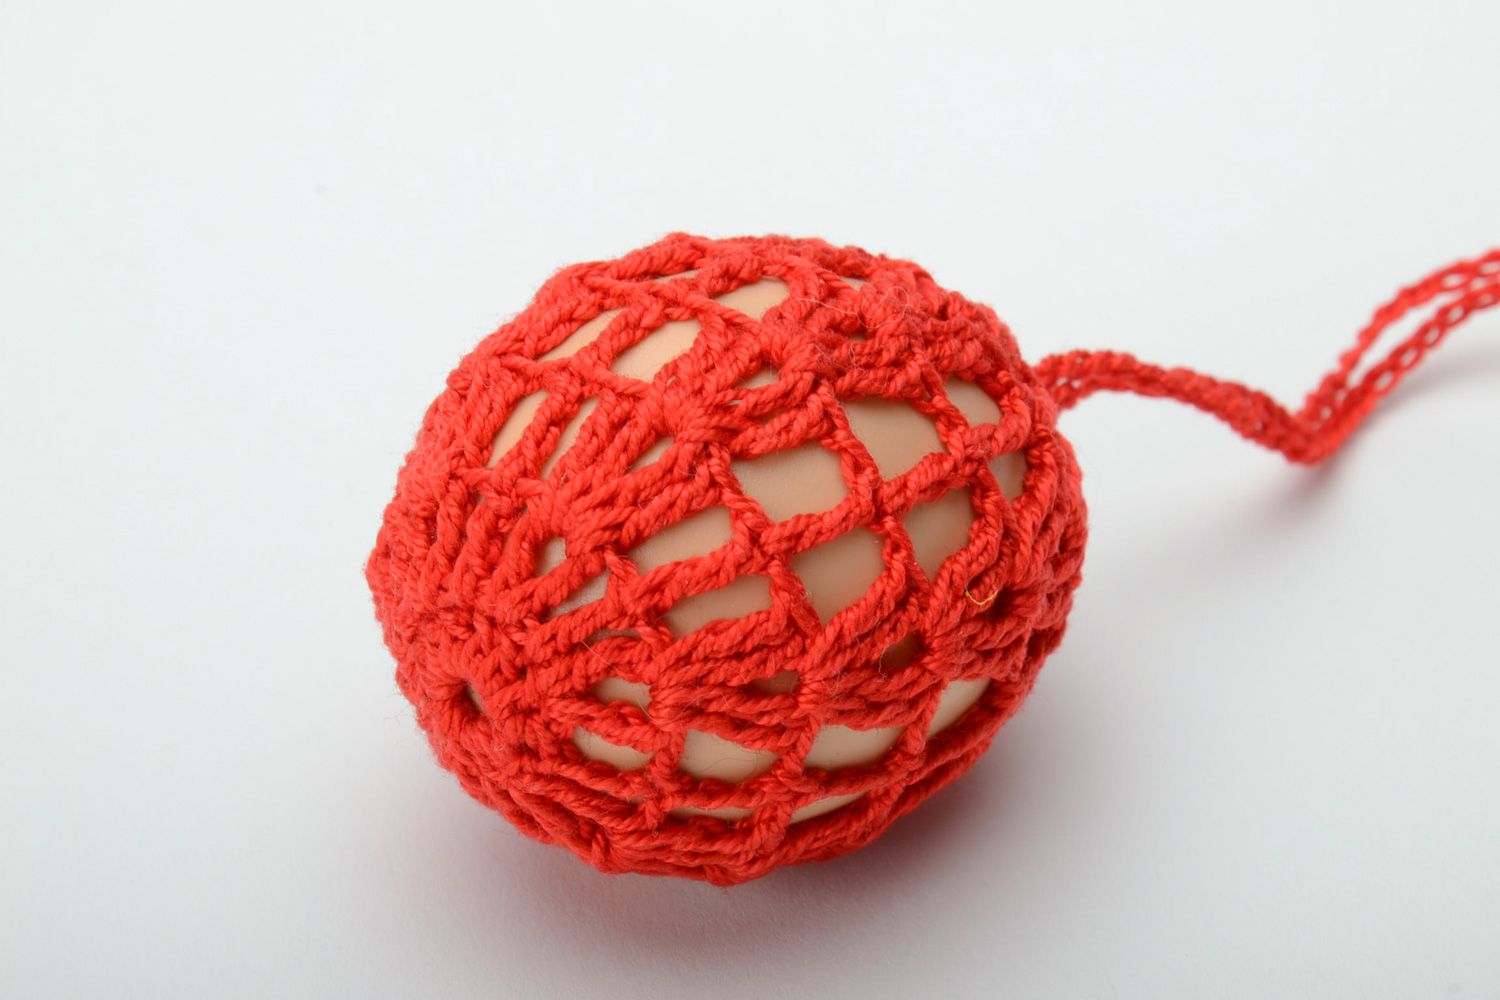 Homemade red decorative Easter egg woven over with threads photo 2